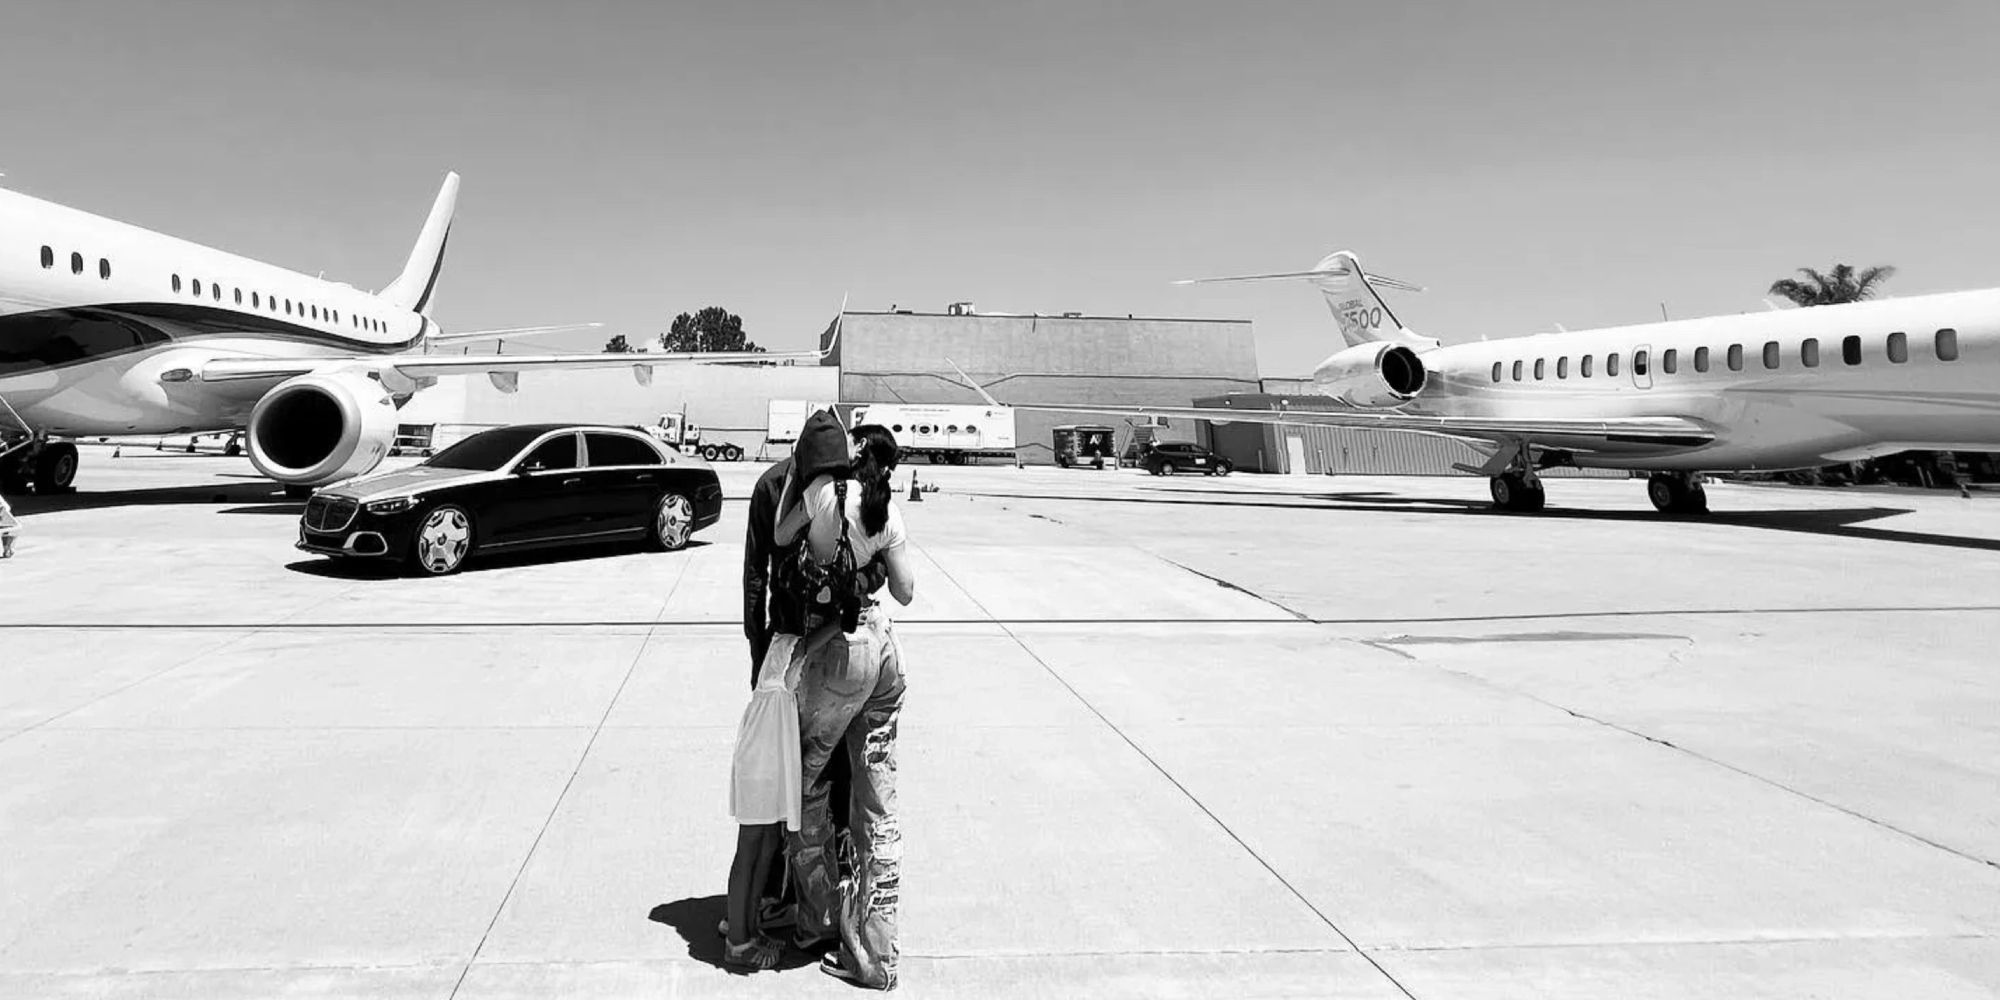 Travis Scott and Kylie Jenner's private jets